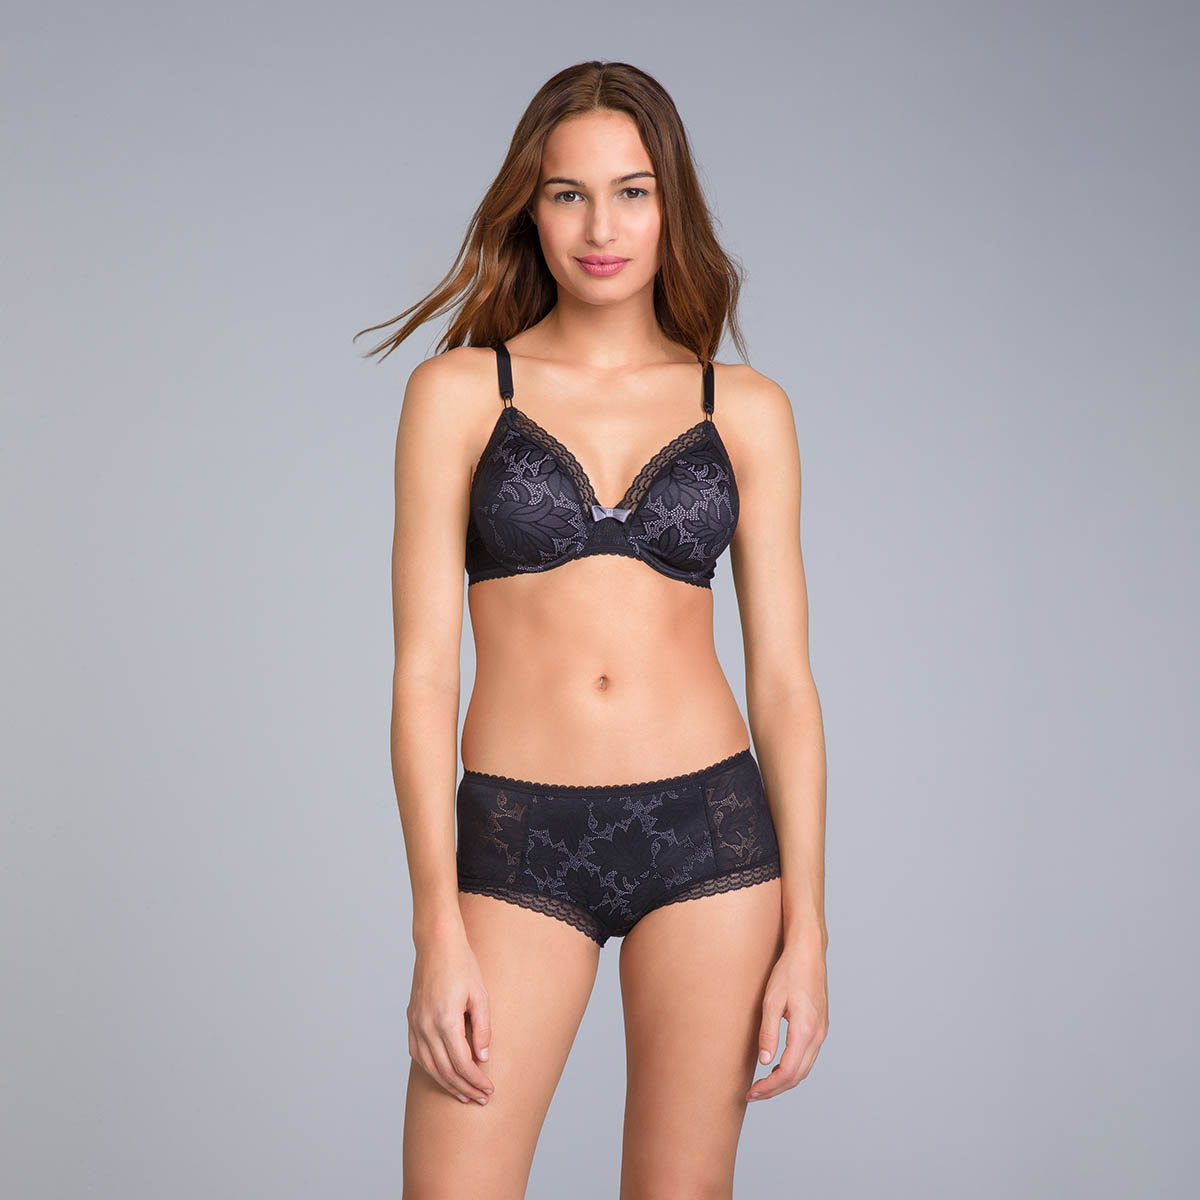 Shorts in Black Lace - Invisible Elegance, , PLAYTEX